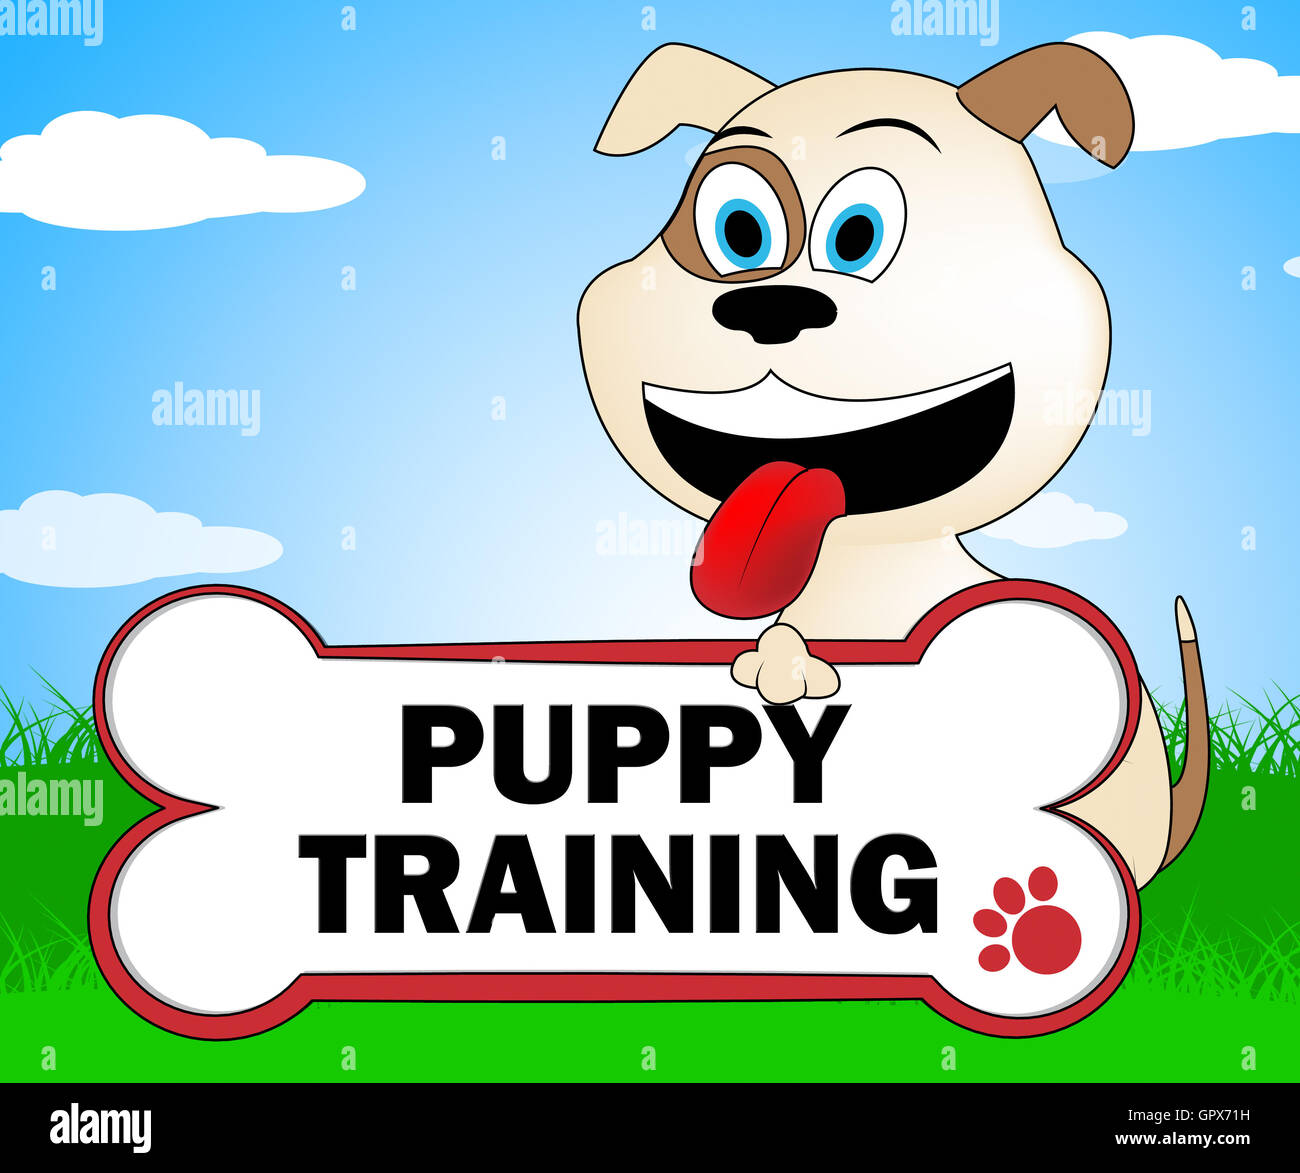 Puppy Training Meaning Pets Canines And Dogs Stock Photo